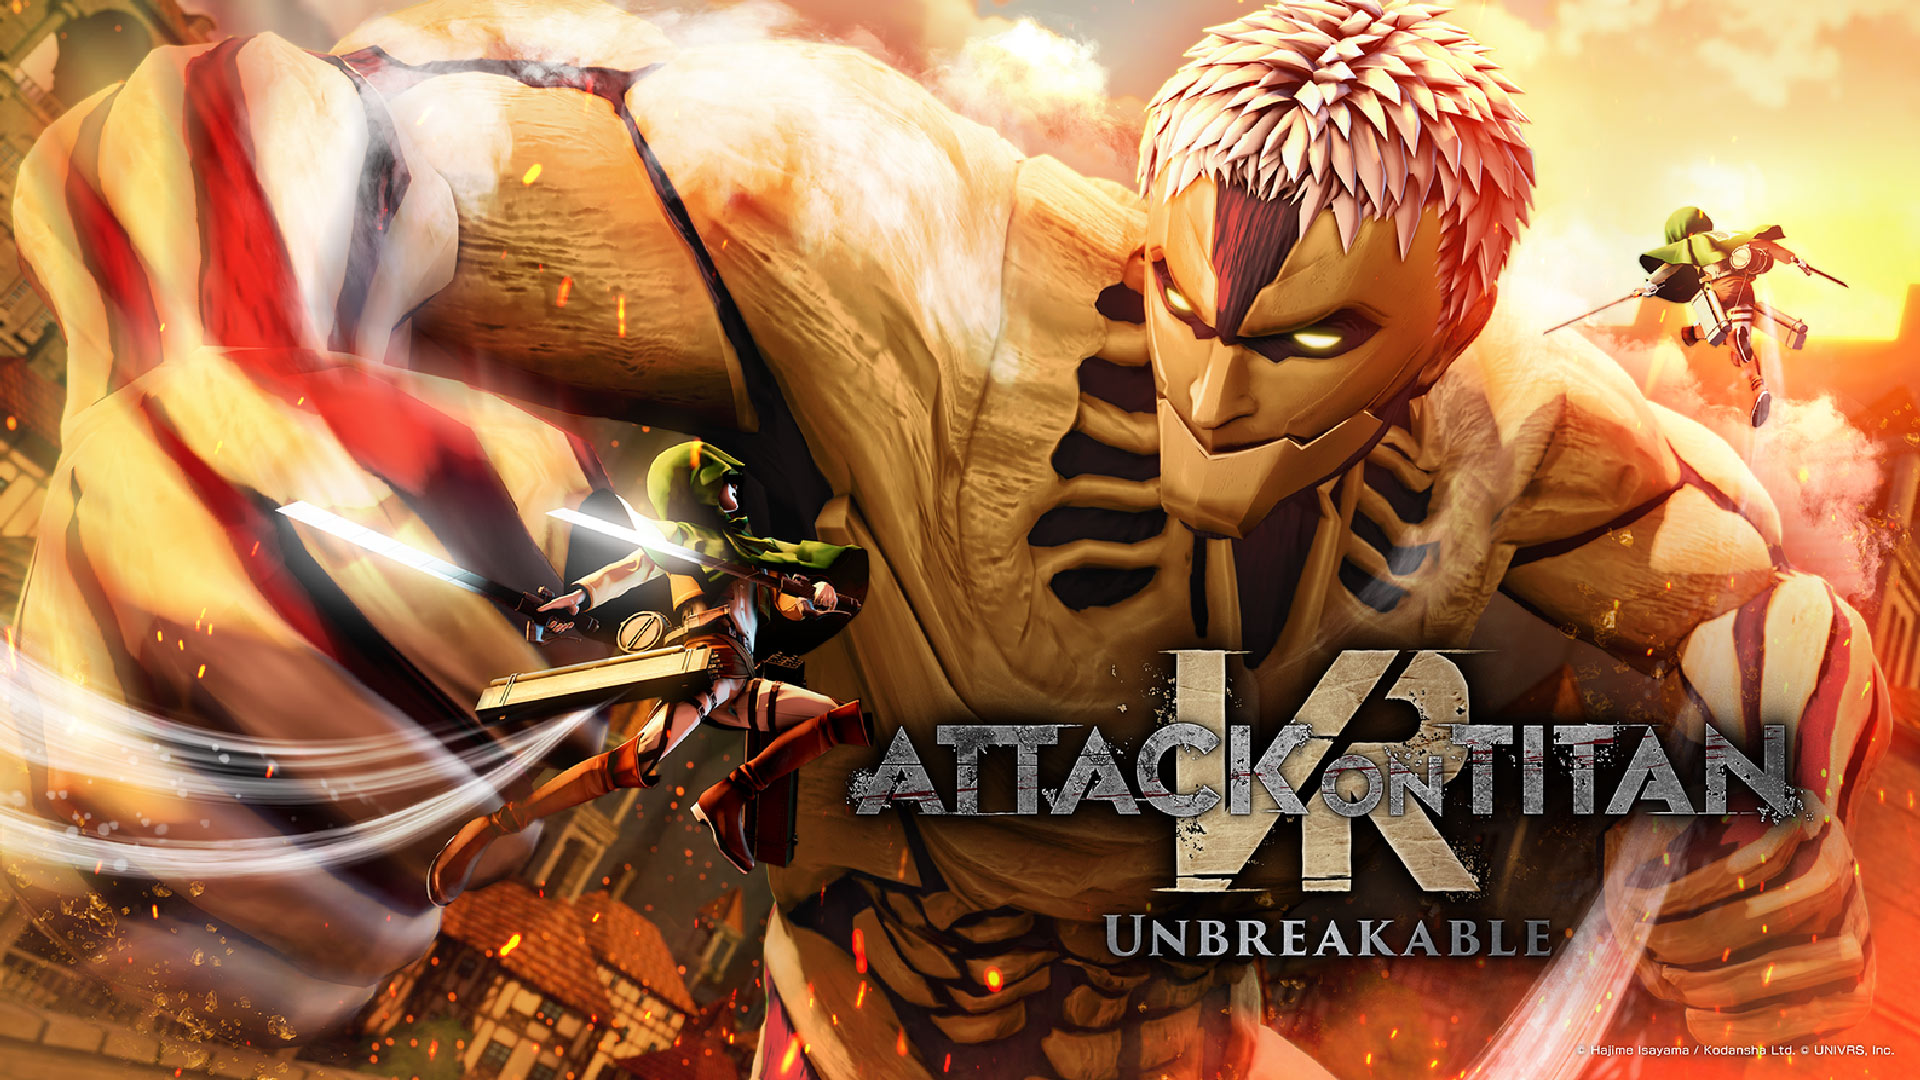 Attack On Titan VR is a free game using Unreal Engine 4 that you must  experience